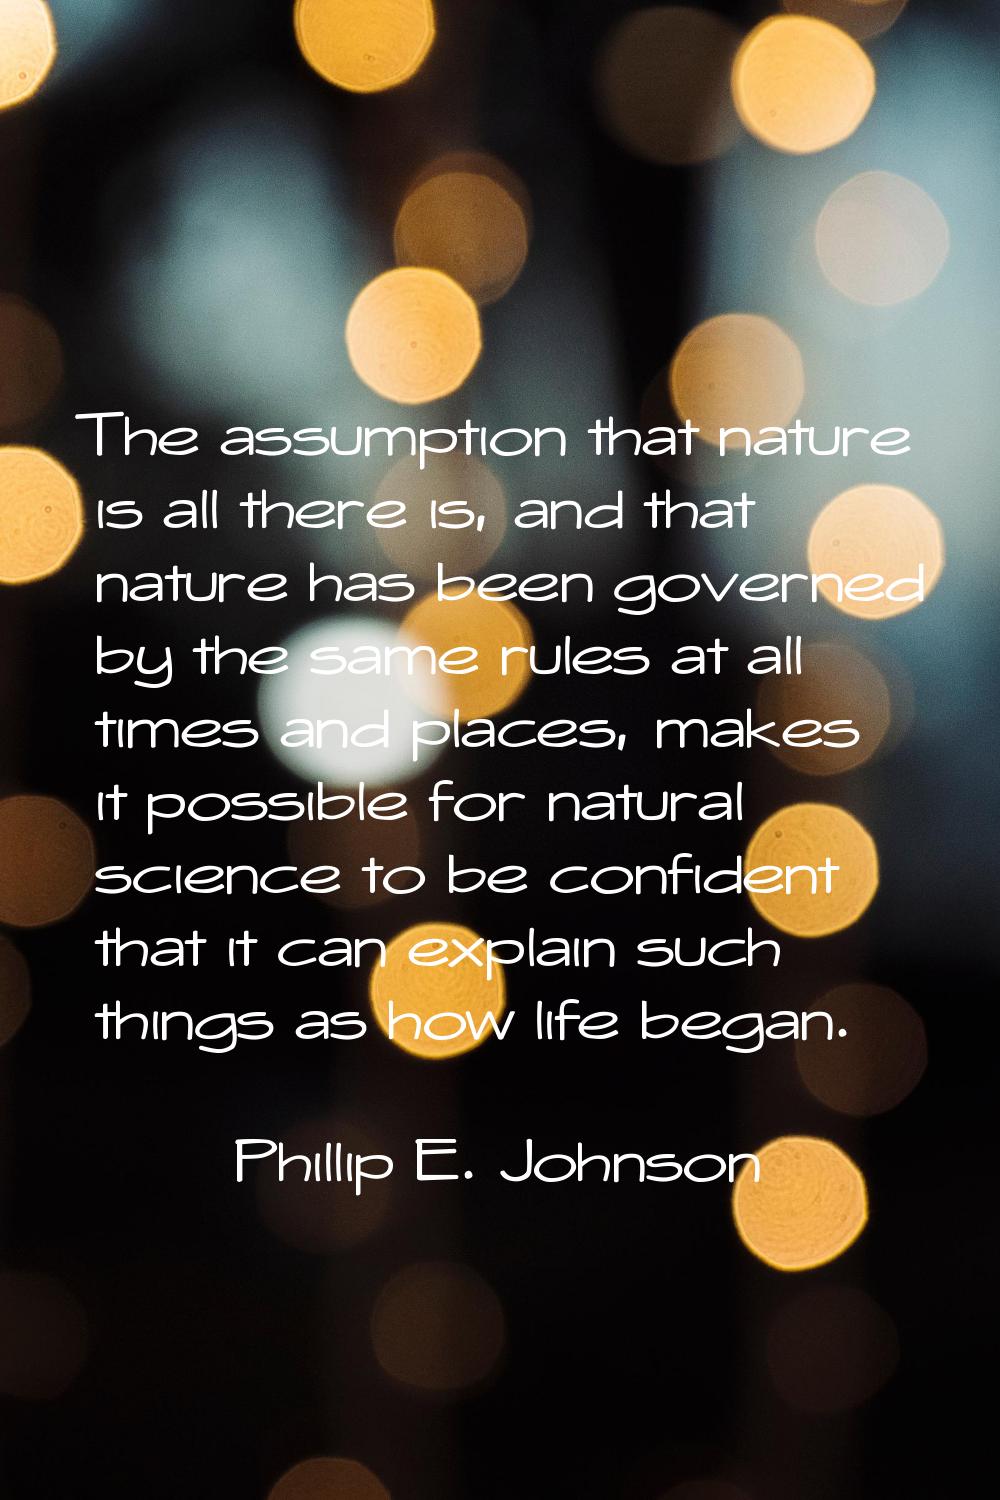 The assumption that nature is all there is, and that nature has been governed by the same rules at 